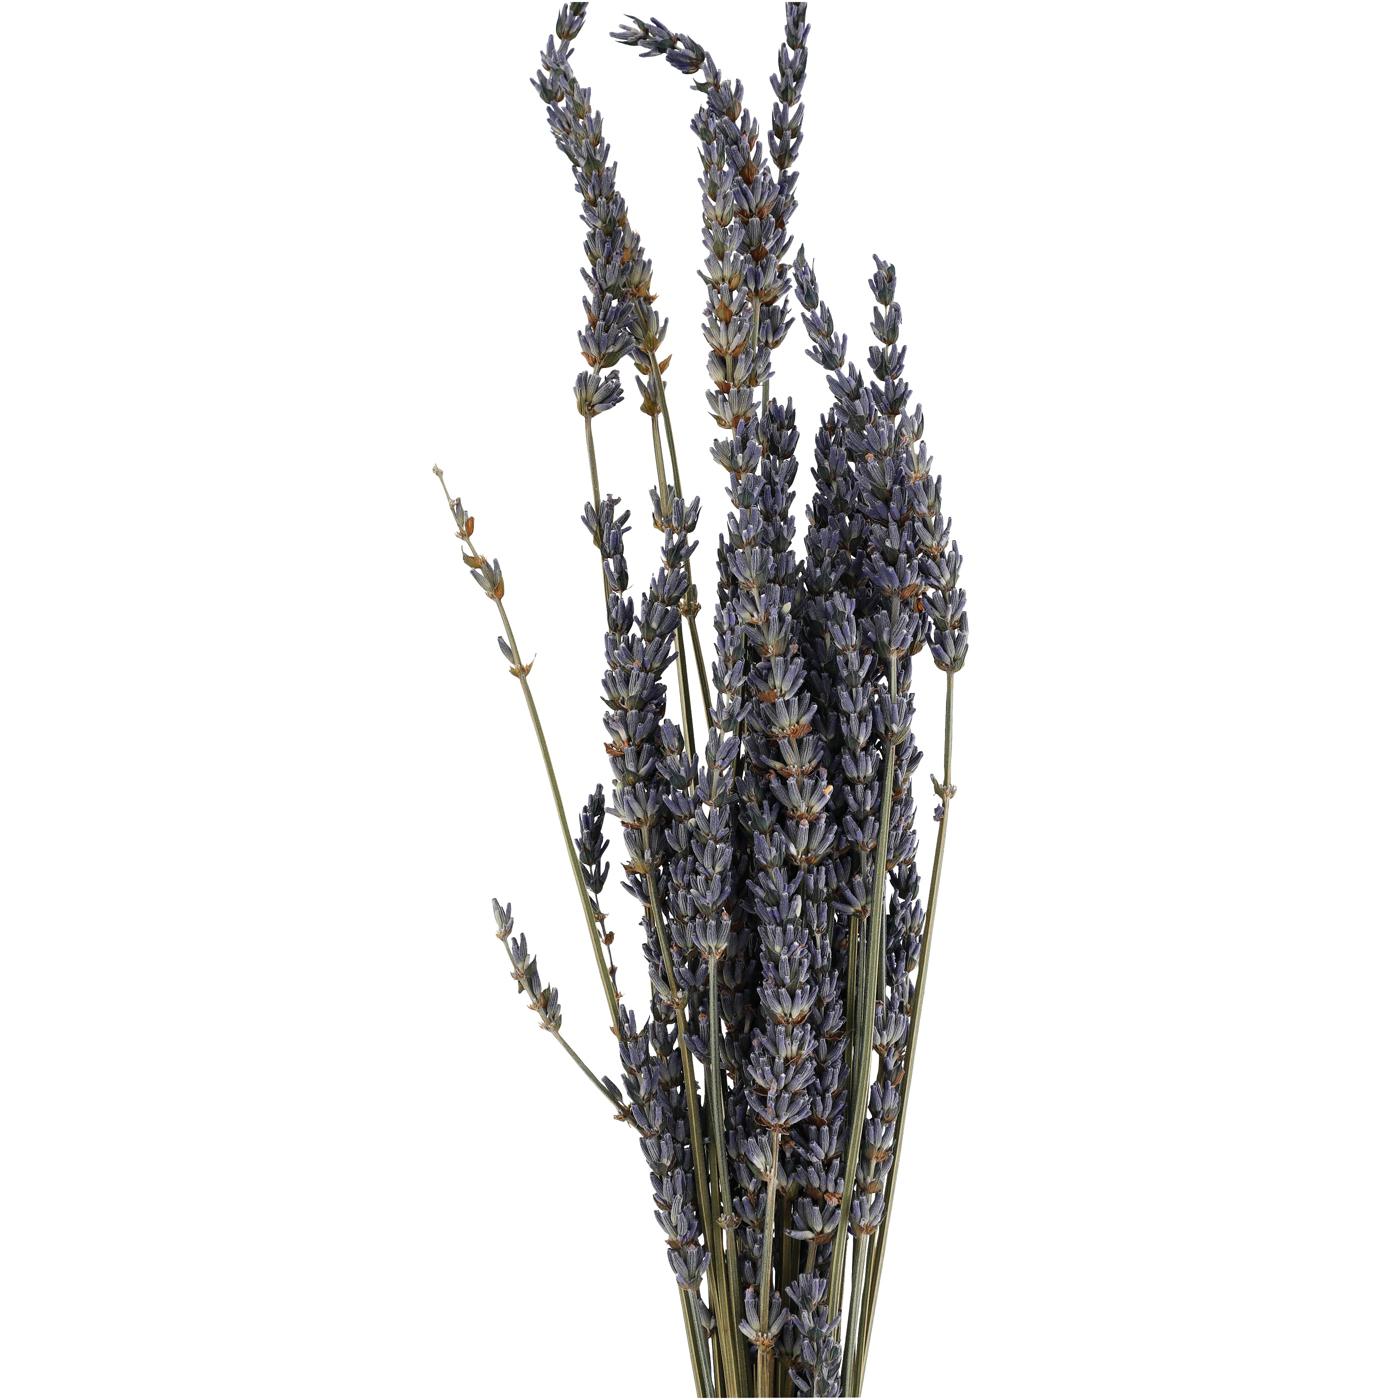 Dried Lavender Stems (Flowers), Weir's Lane Lavender & Apiary